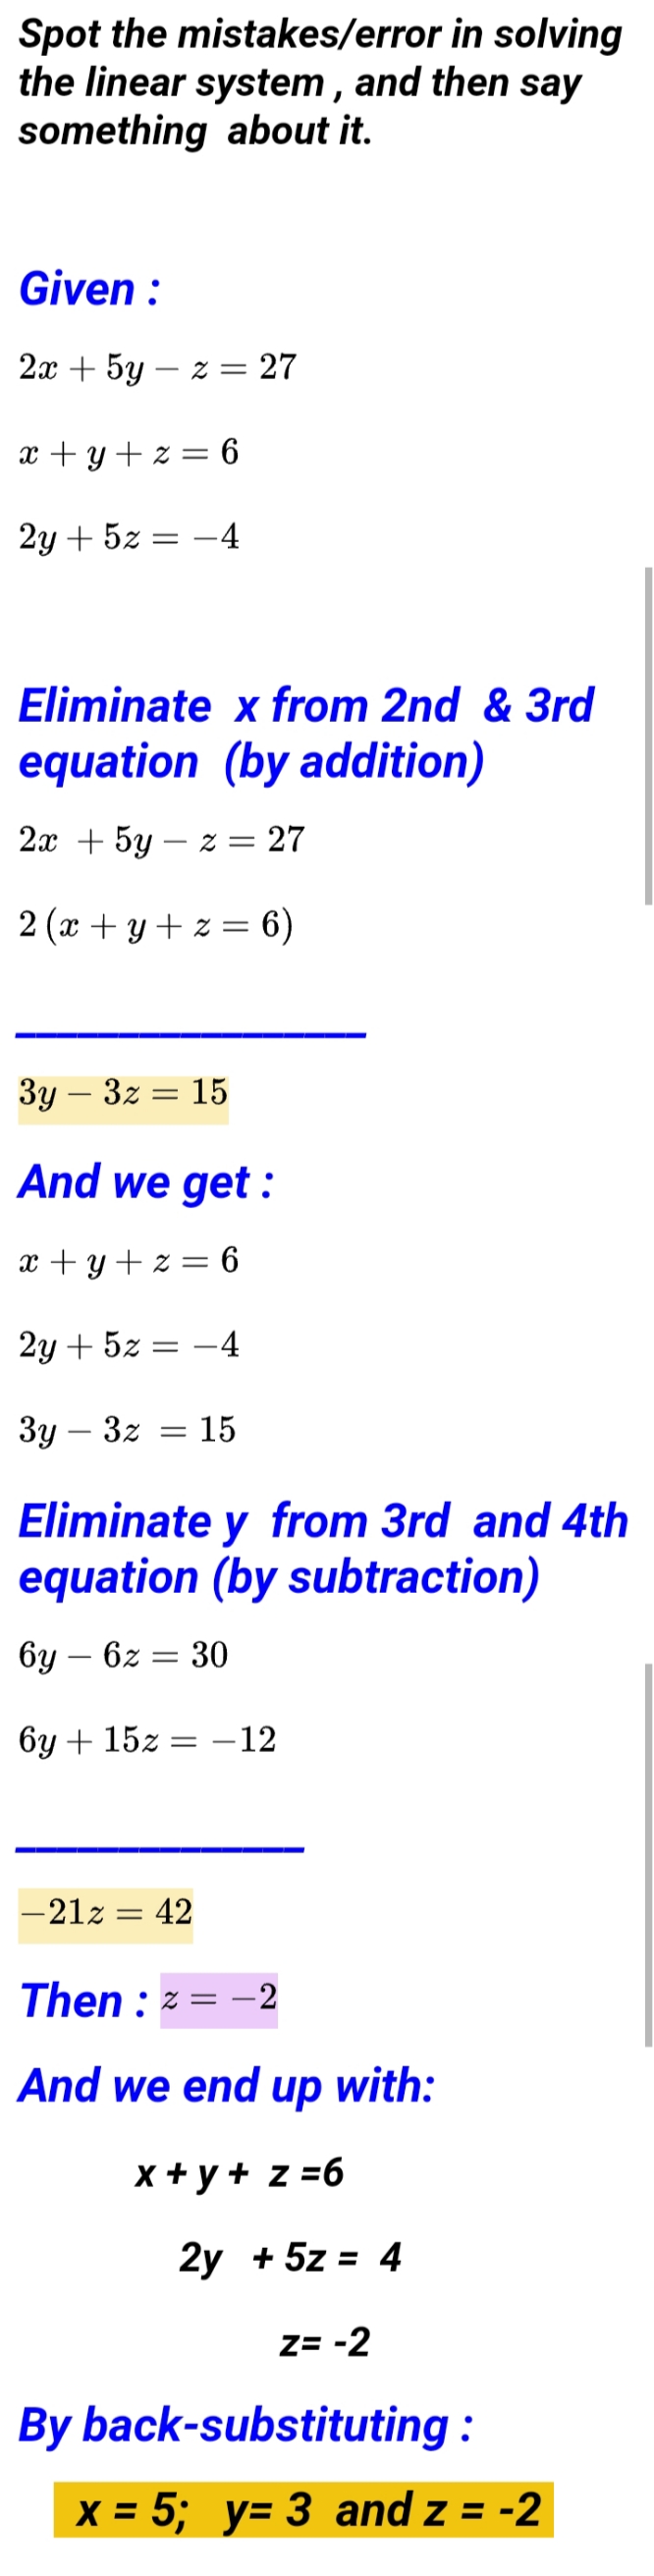 Spot the mistakes/error in solving
the linear system , and then say
something about it.
Given :
2а + 5y — 2 3D 27
x + y + z = 6
2у + 52
-4
Eliminate x from 2nd & 3rd
equation (by addition)
2x + 5y – z = 27
2 (x + y+ z = 6)
Зу — З2 — 15
|
And we get :
x + y + z = 6
2у + 52
-4
Зу — 32
= 15
Eliminate y from 3rd and 4th
equation (by subtraction)
бу — 62
30
бу + 152:
–12
-21z = 42
Then : z = -2
And we end up with:
x + y + z =6
2y + 5z = 4
Z= -2
By back-substituting :
X = 5; y= 3 and z = -2
%3D
